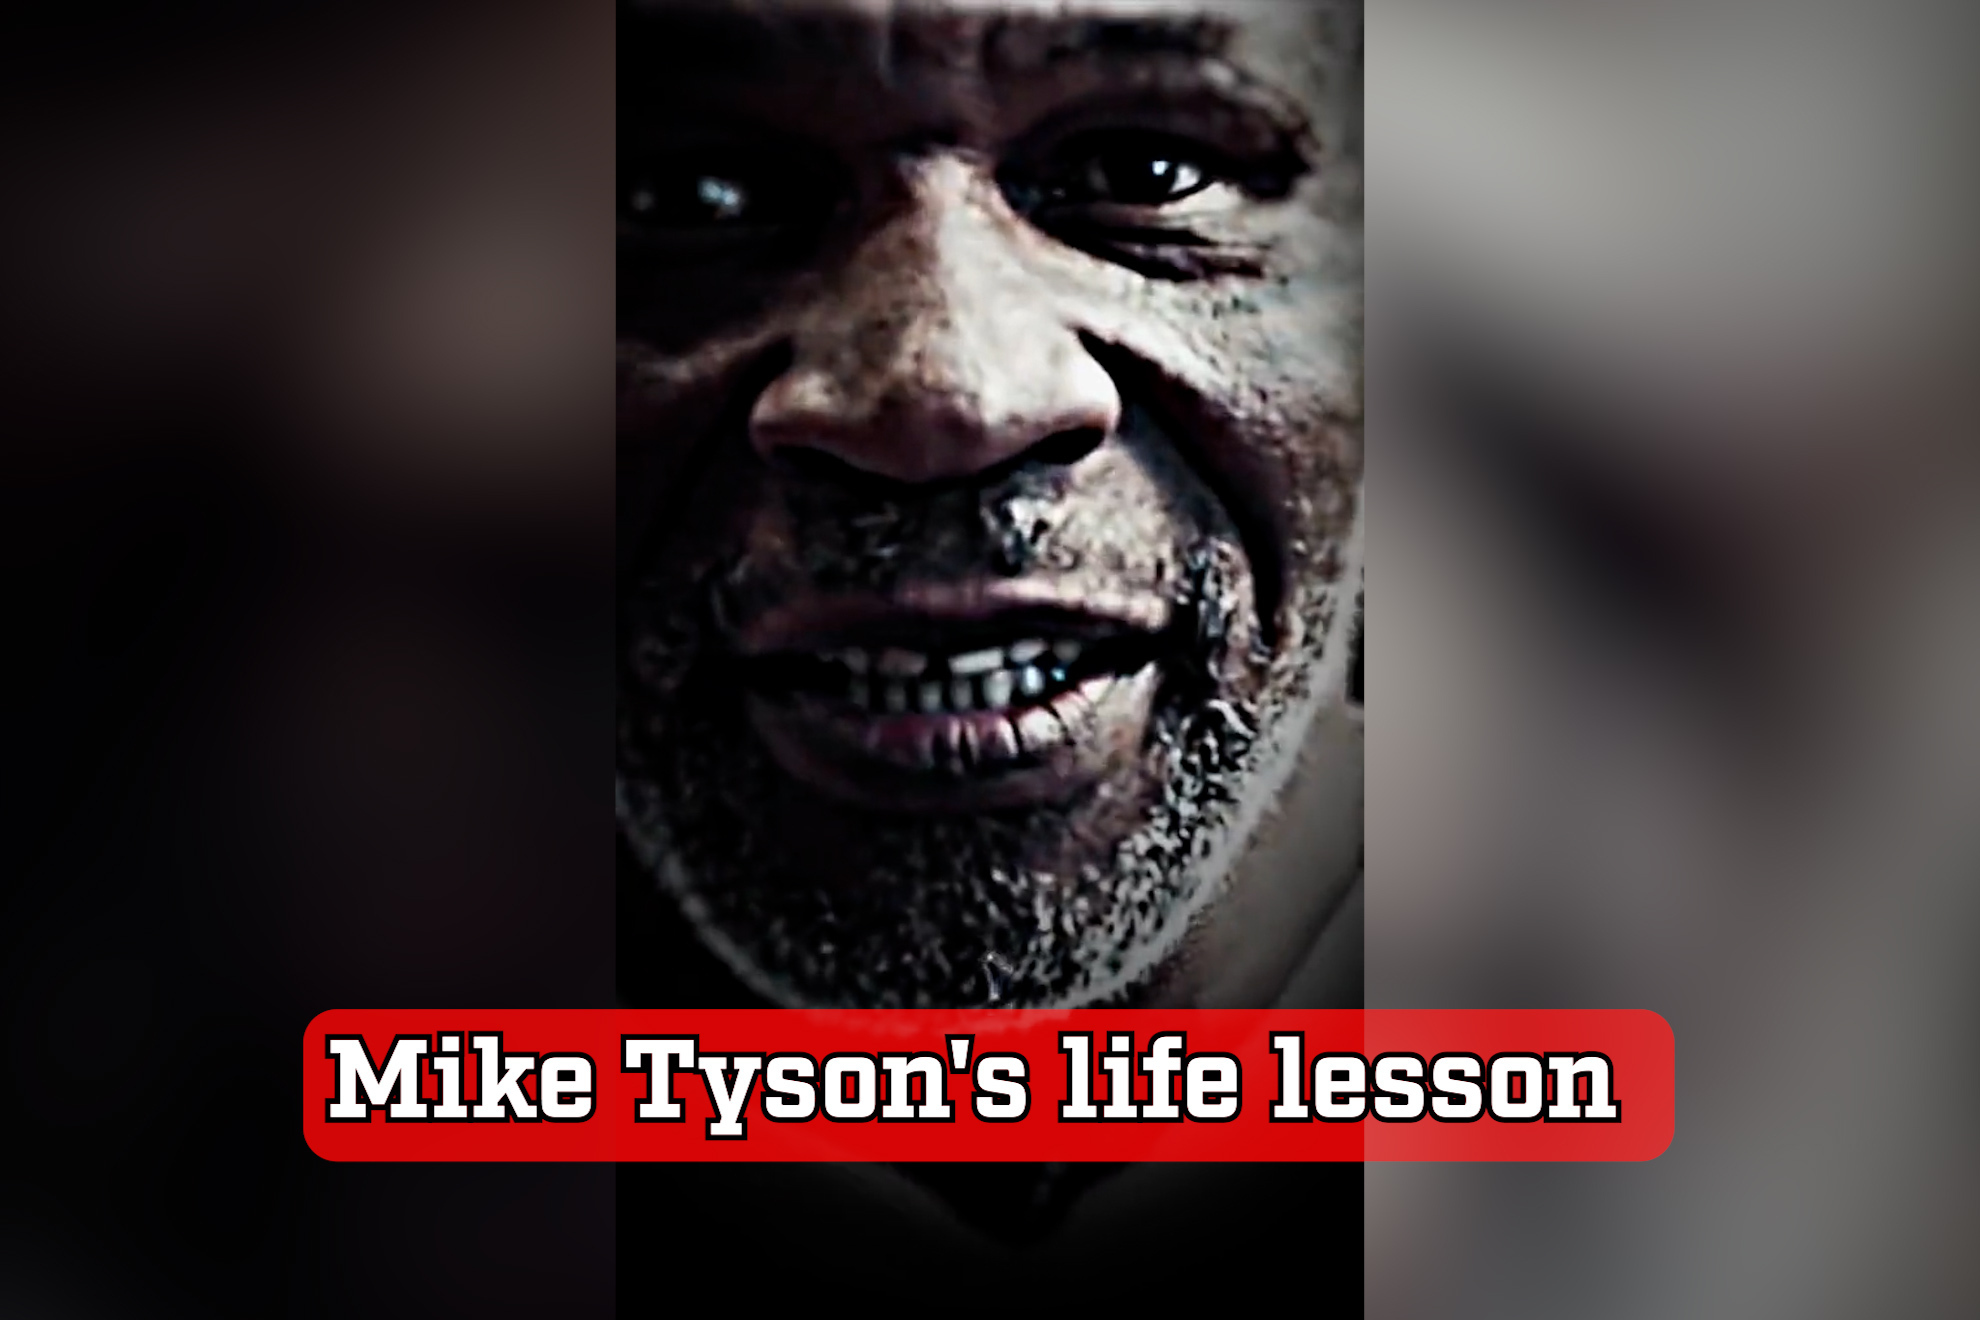 Mike Tyson delivers a profound message to those in search of life's meaning